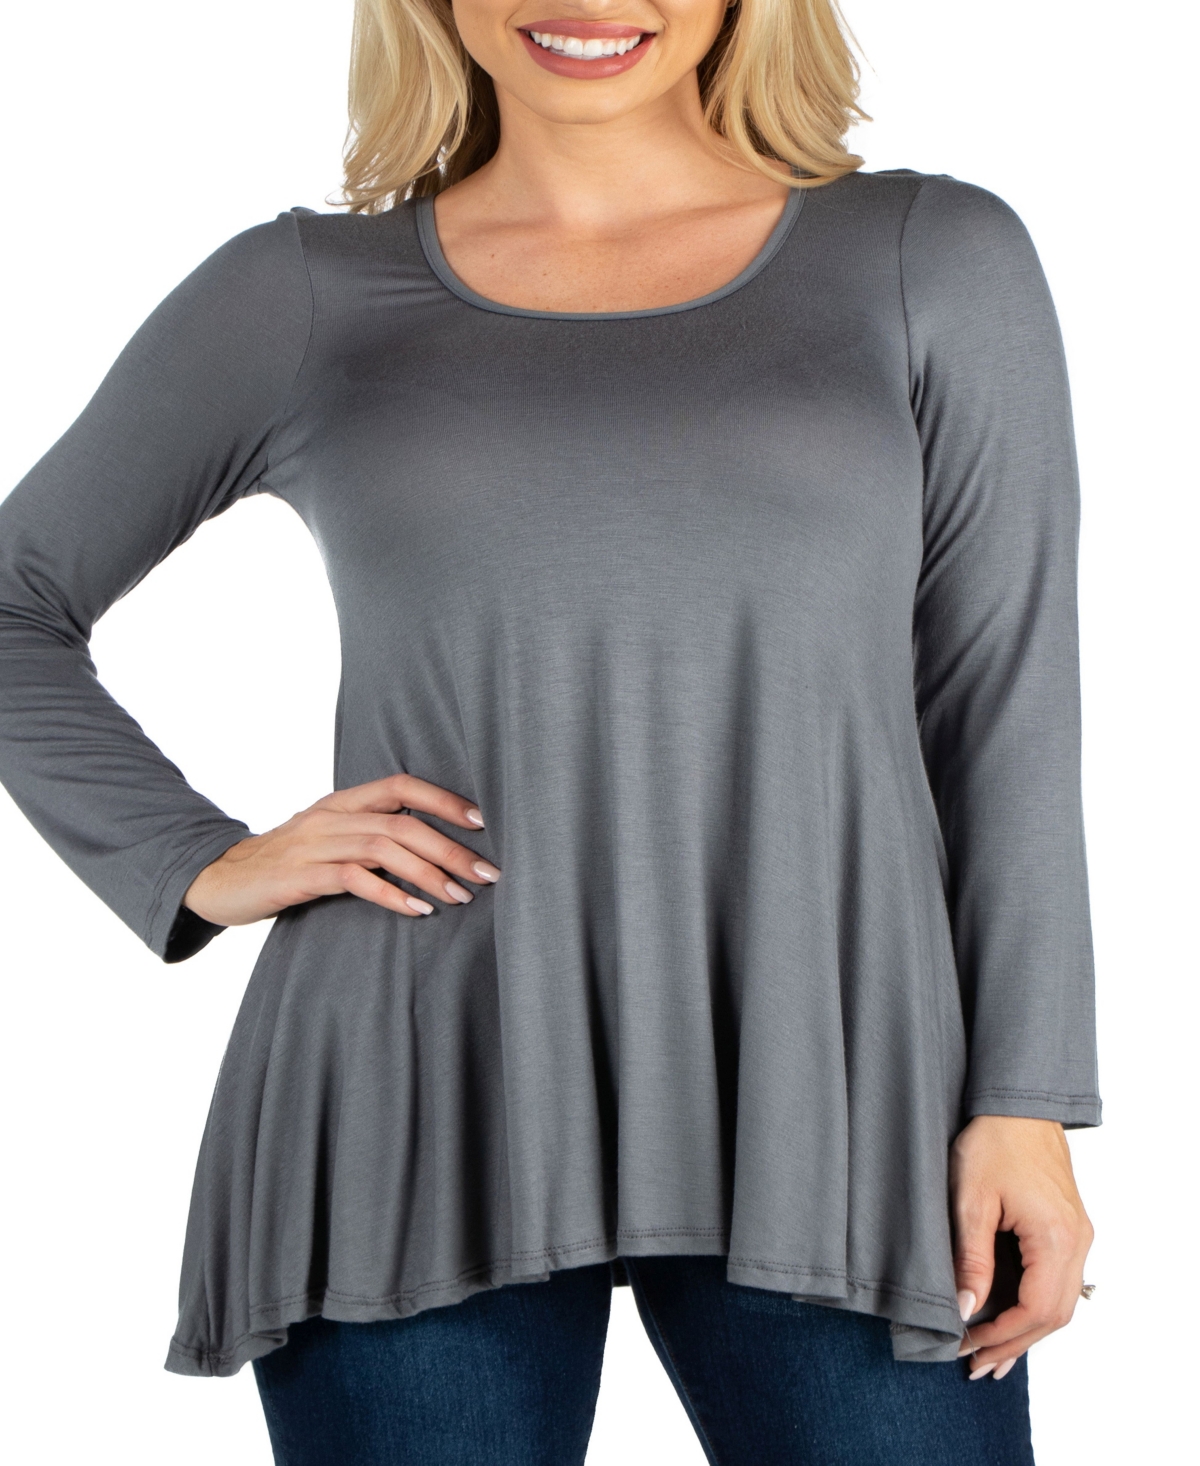 Long Sleeve Solid Color Swing Style Flared Tunic Top - Charcoal